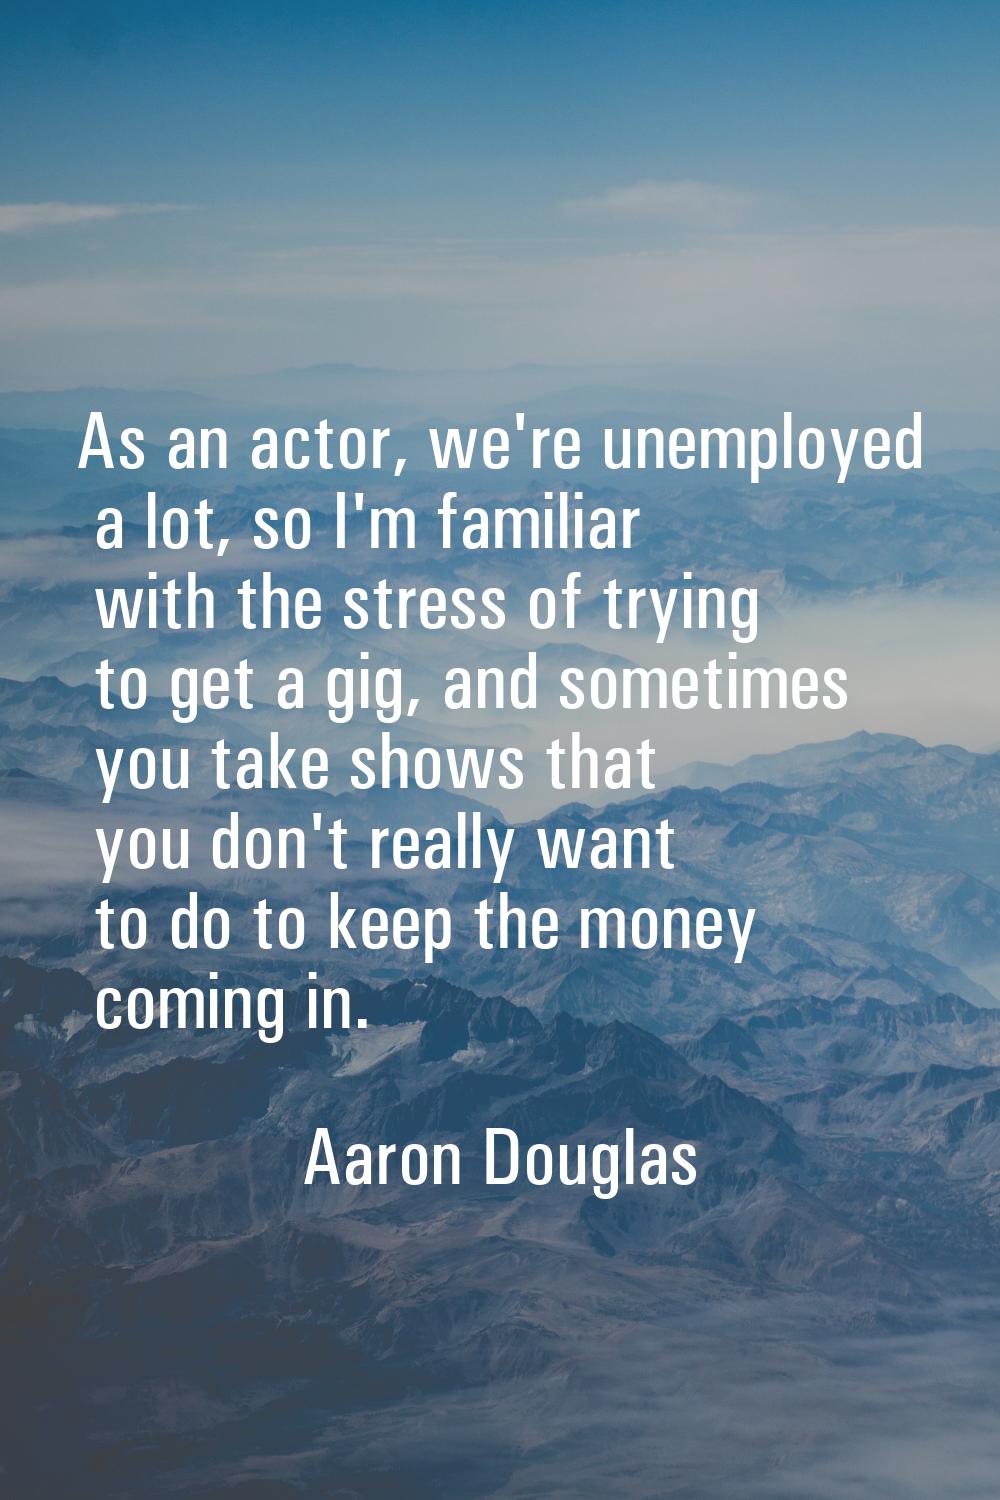 As an actor, we're unemployed a lot, so I'm familiar with the stress of trying to get a gig, and so